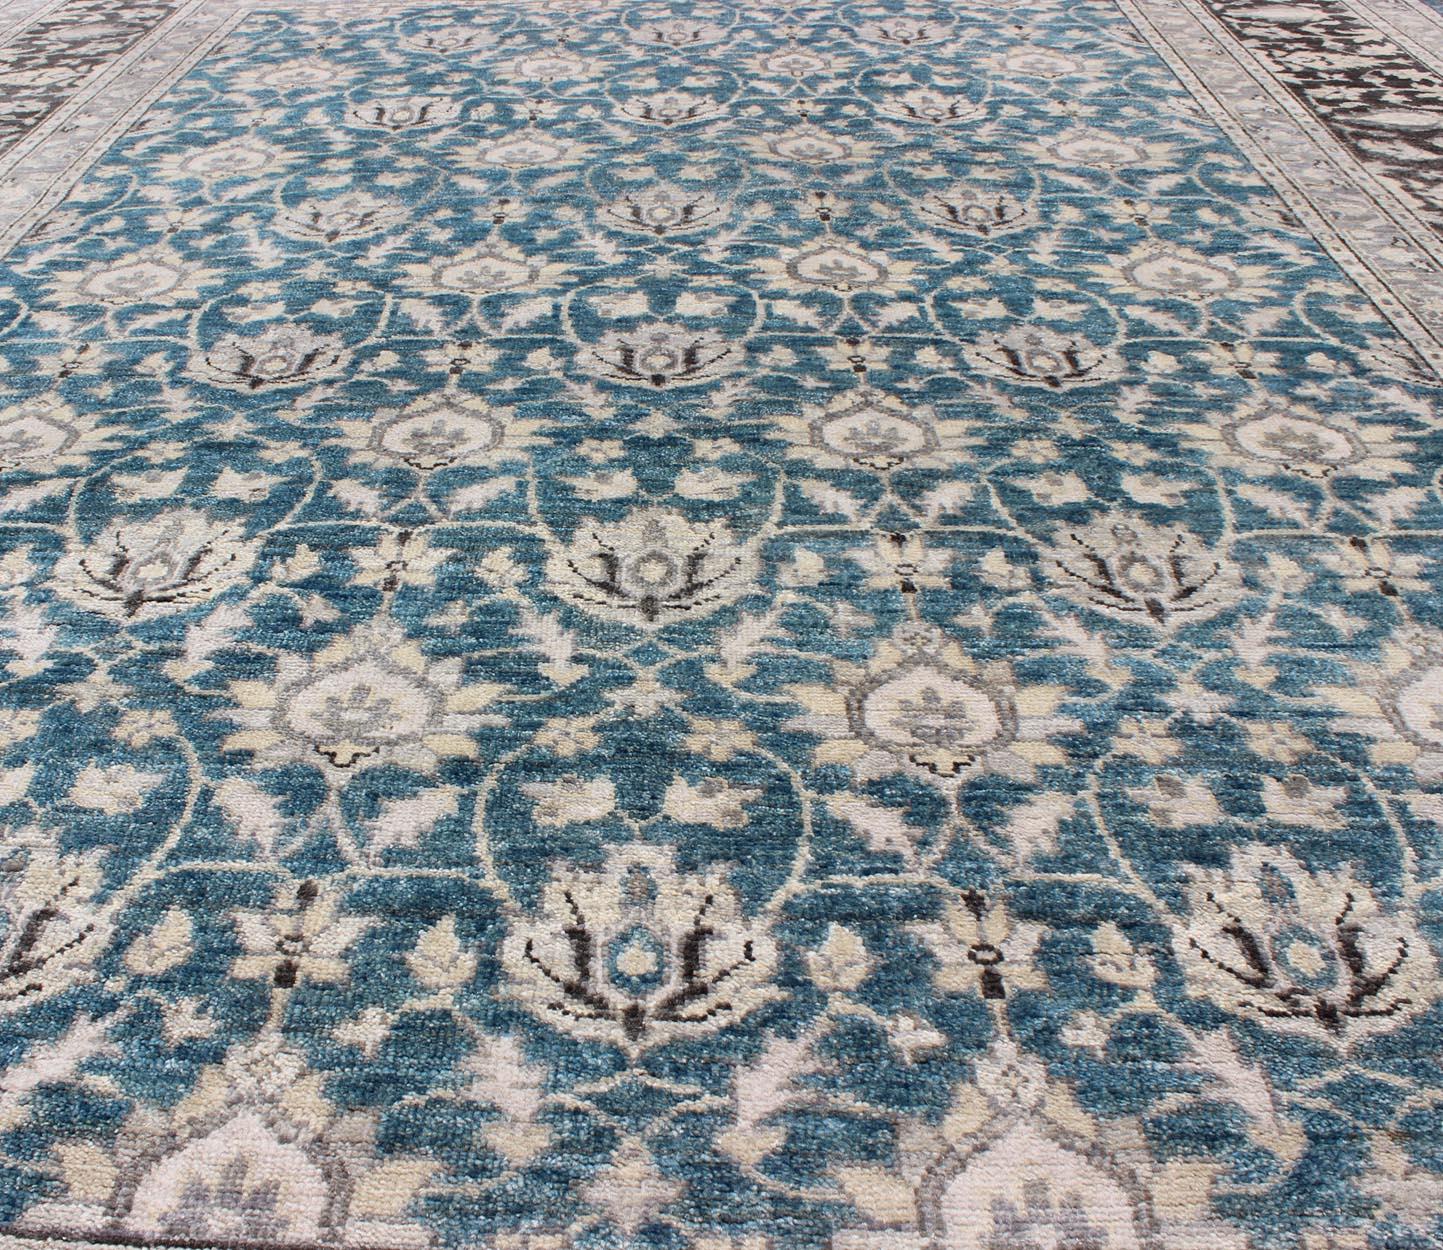  Tabriz Rug in Wool With All-Over Design by Keivan Woven Arts. 
Measures: 9'0 x 12'0.
This hand knotted Tabriz rug features a beautiful all-over design rendered in grays, silver, and charcoal and blue tones. The entirety of the piece is enclosed